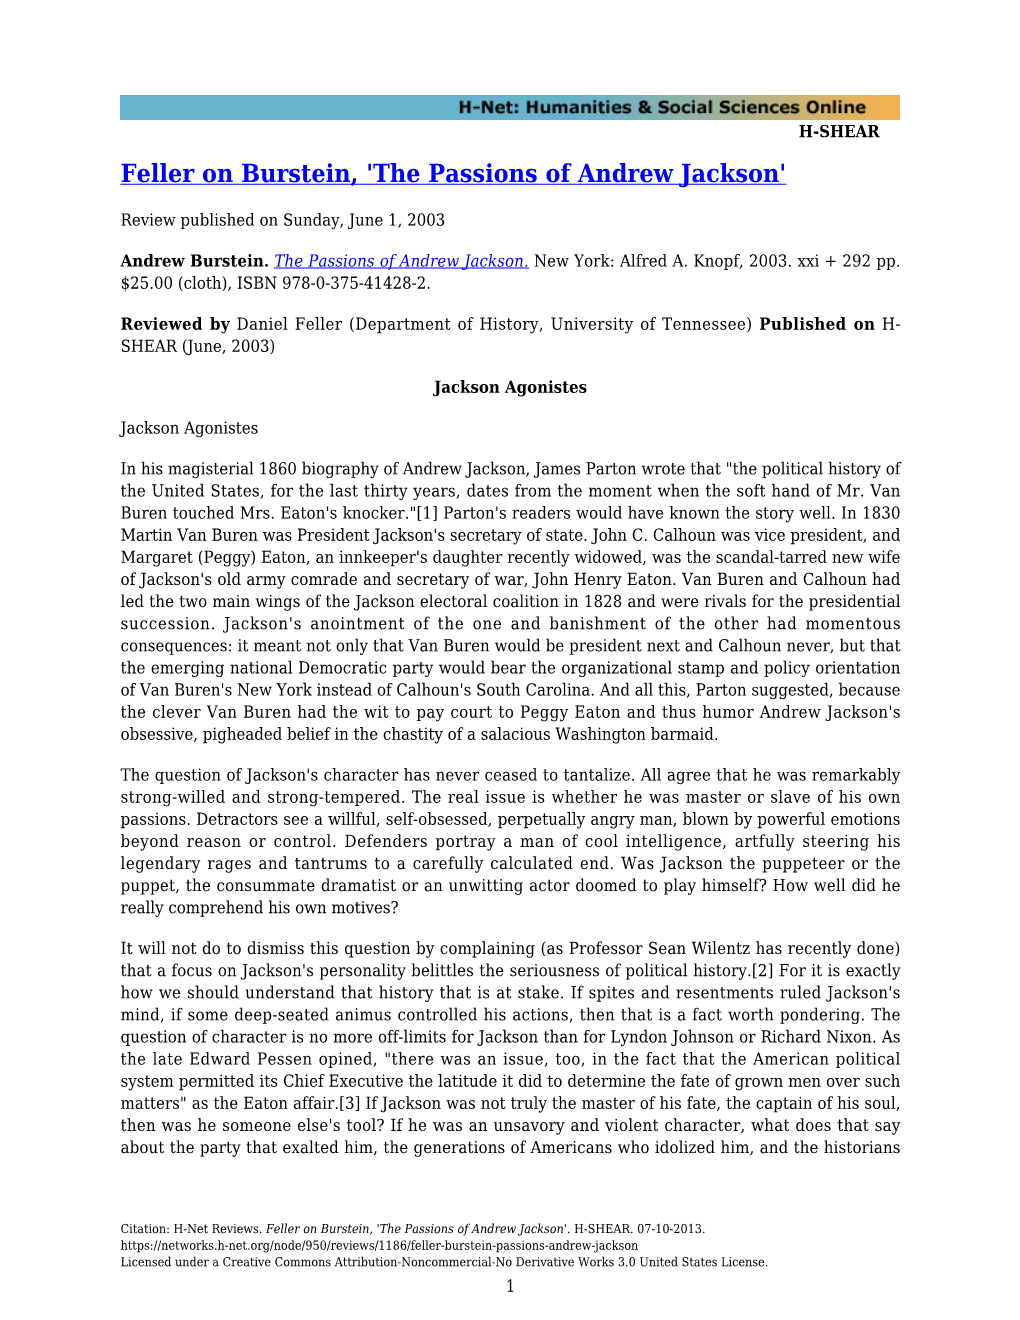 The Passions of Andrew Jackson'